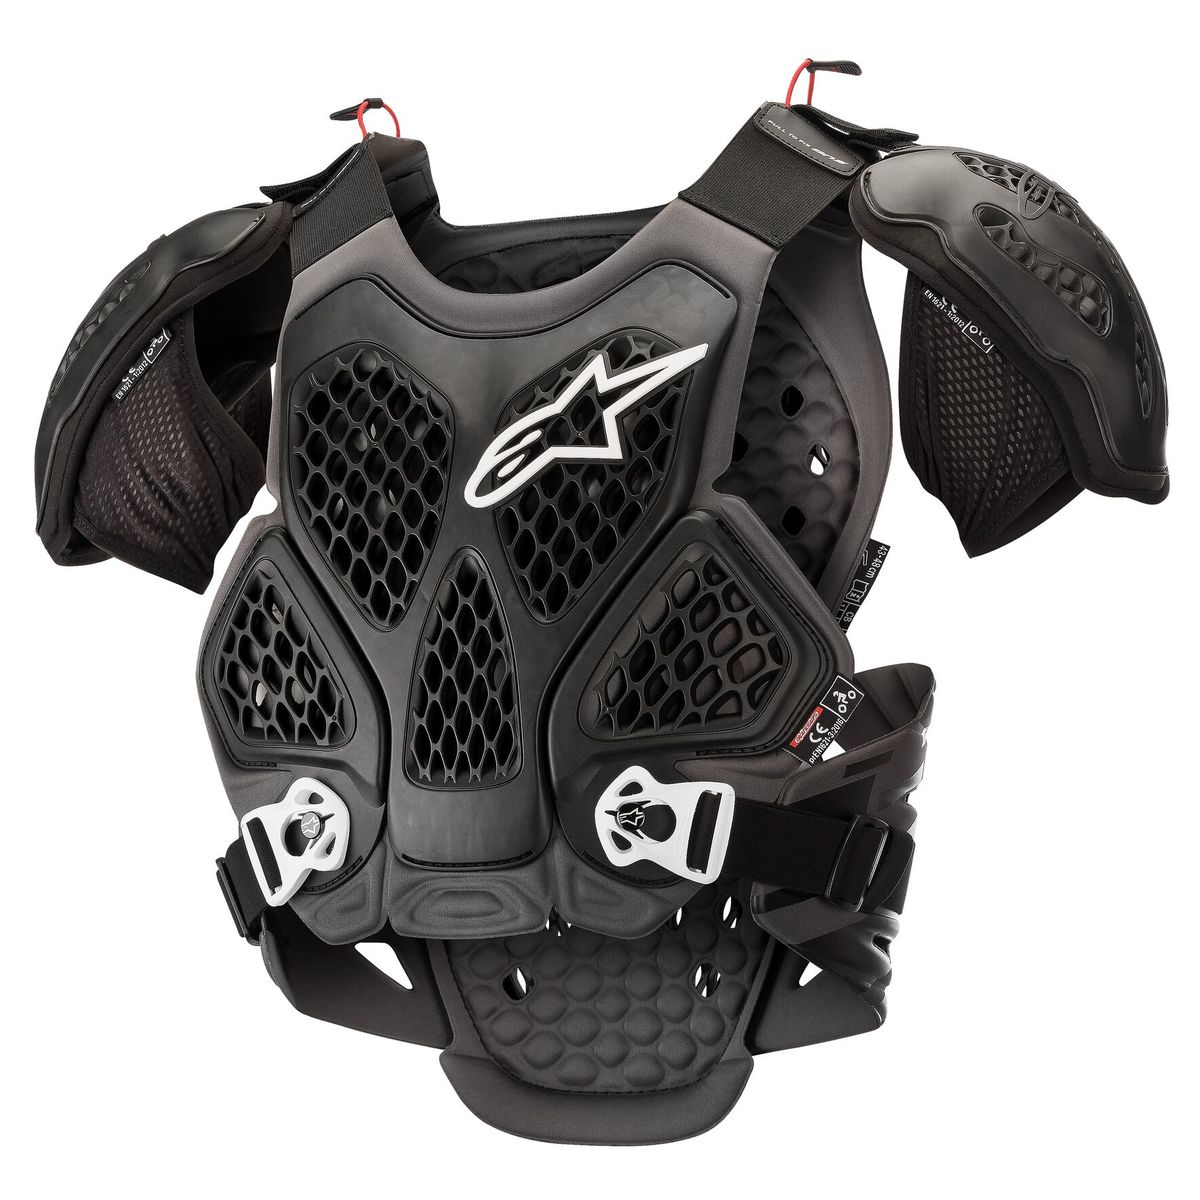 Buy Alpinestars Bionic Chest Protector Online in India